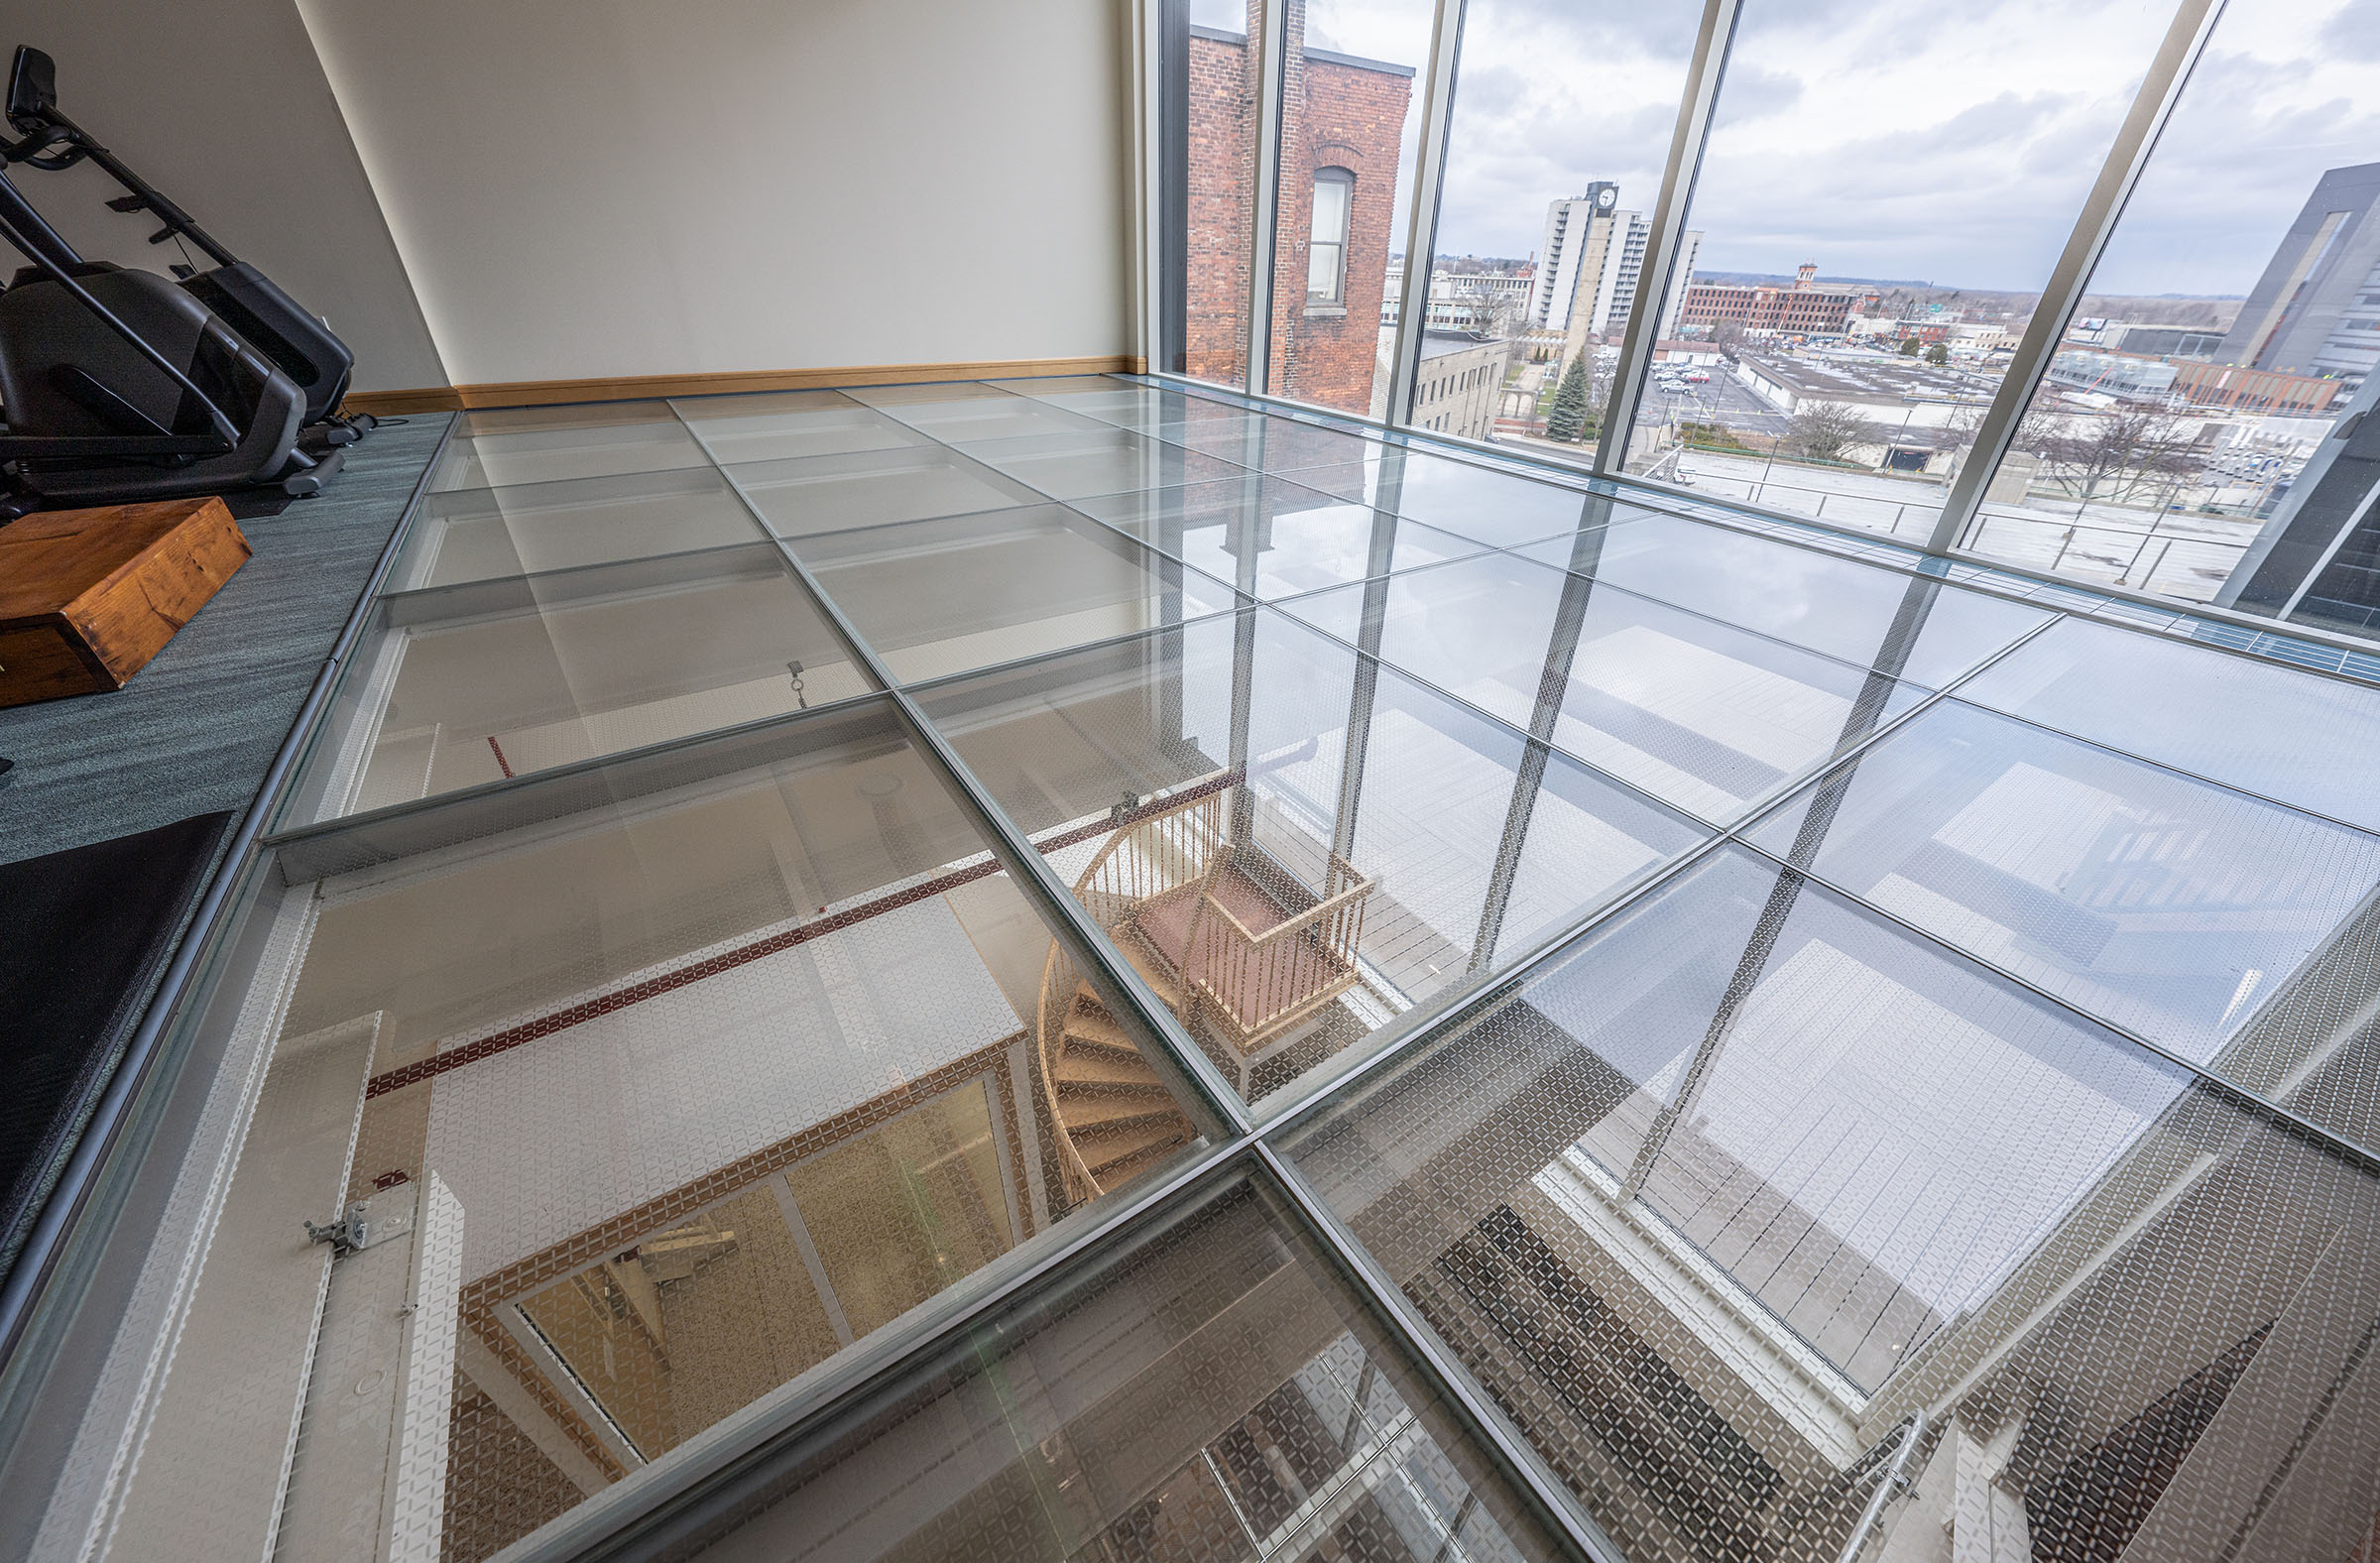 GlassWalk™ Structural Glass Floors | Panels | Features and Options